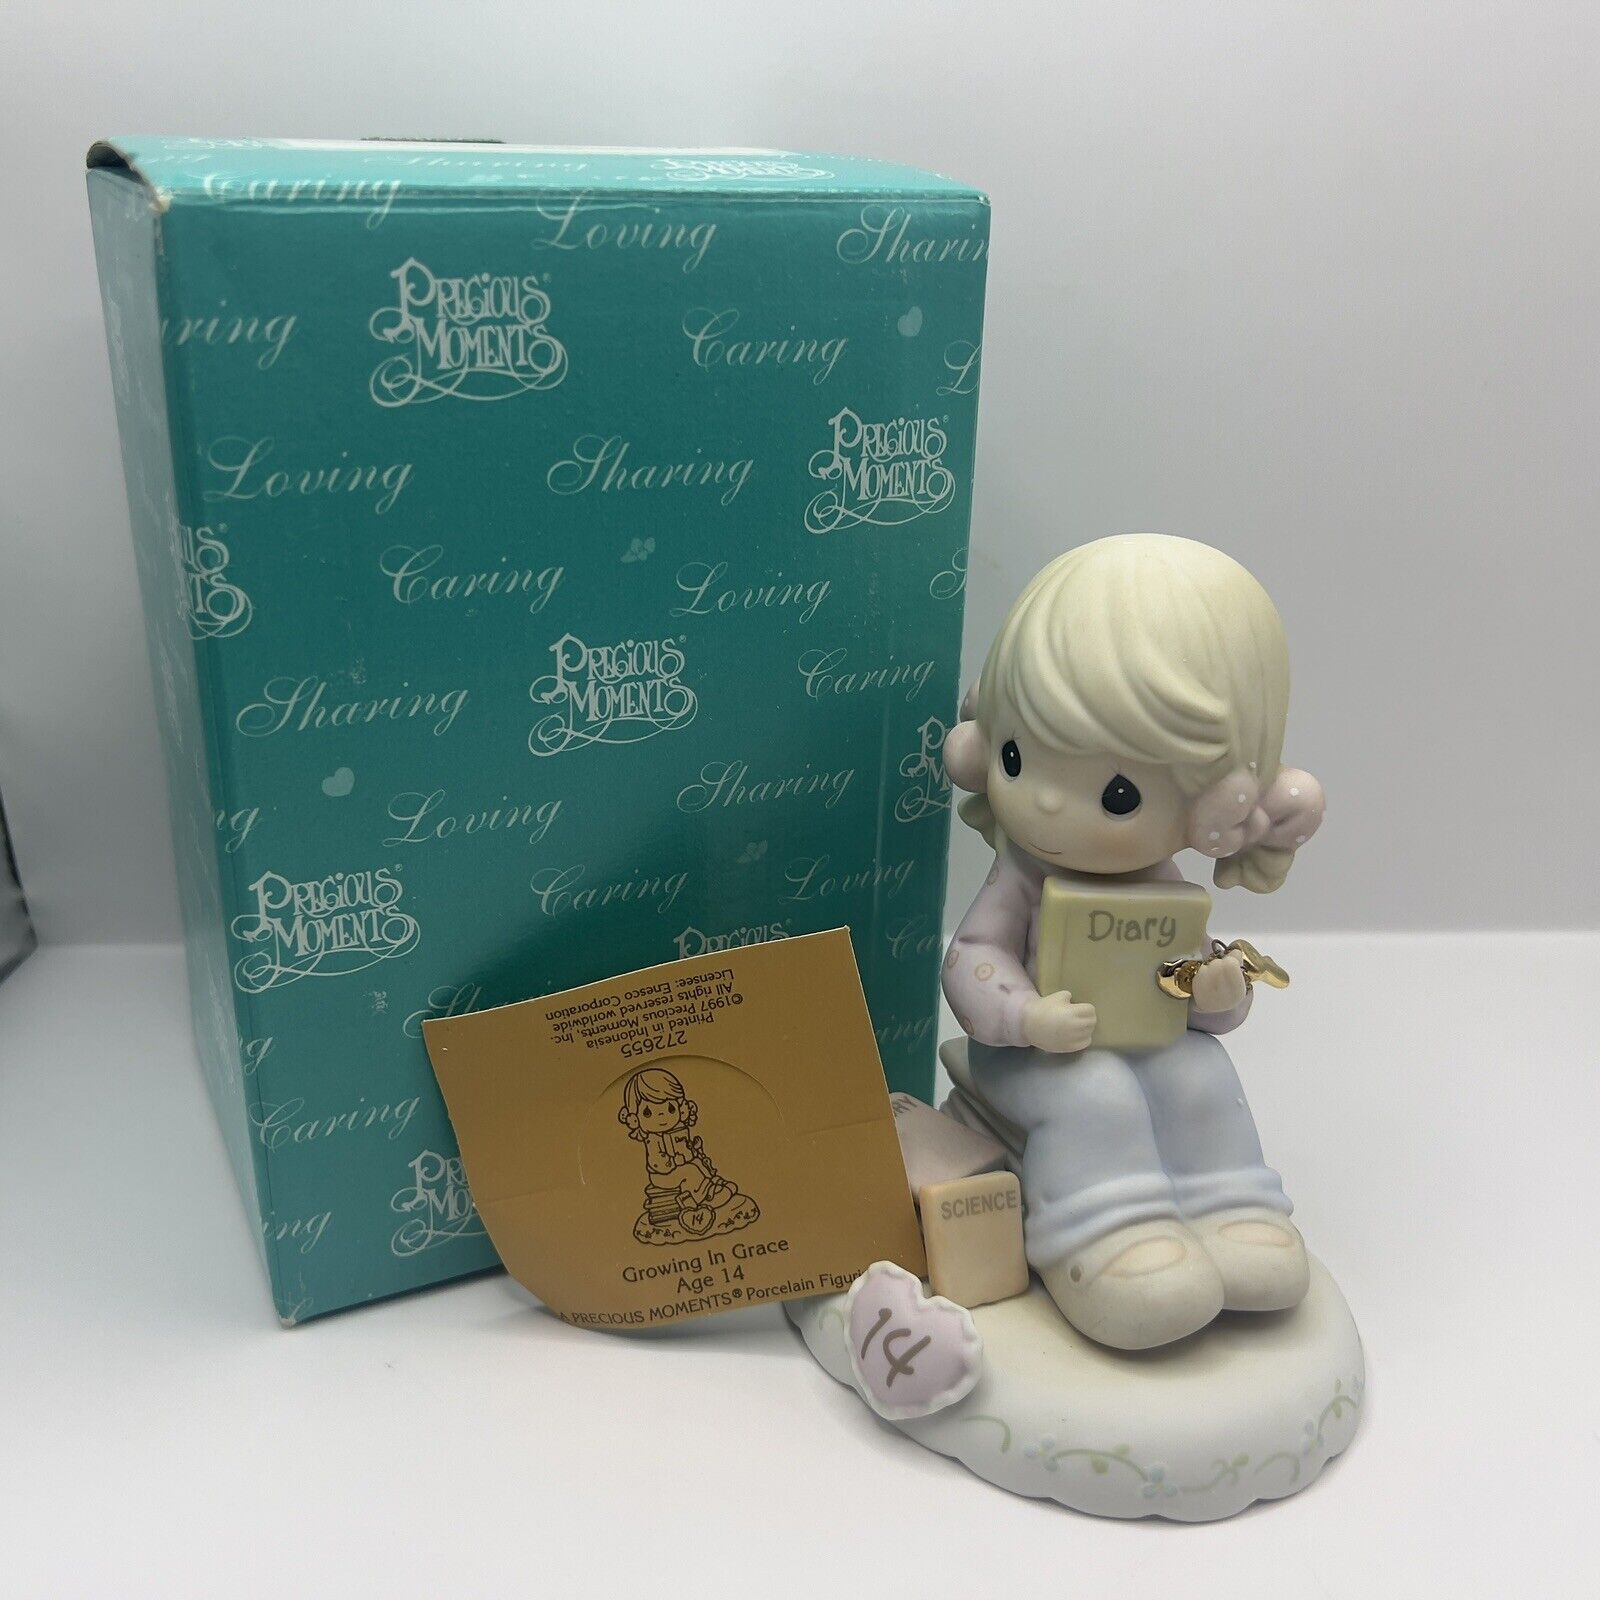 Vtg. Enesco Precious Moments 1997 Growing in Grace Age 14 272655 Blonde Girl